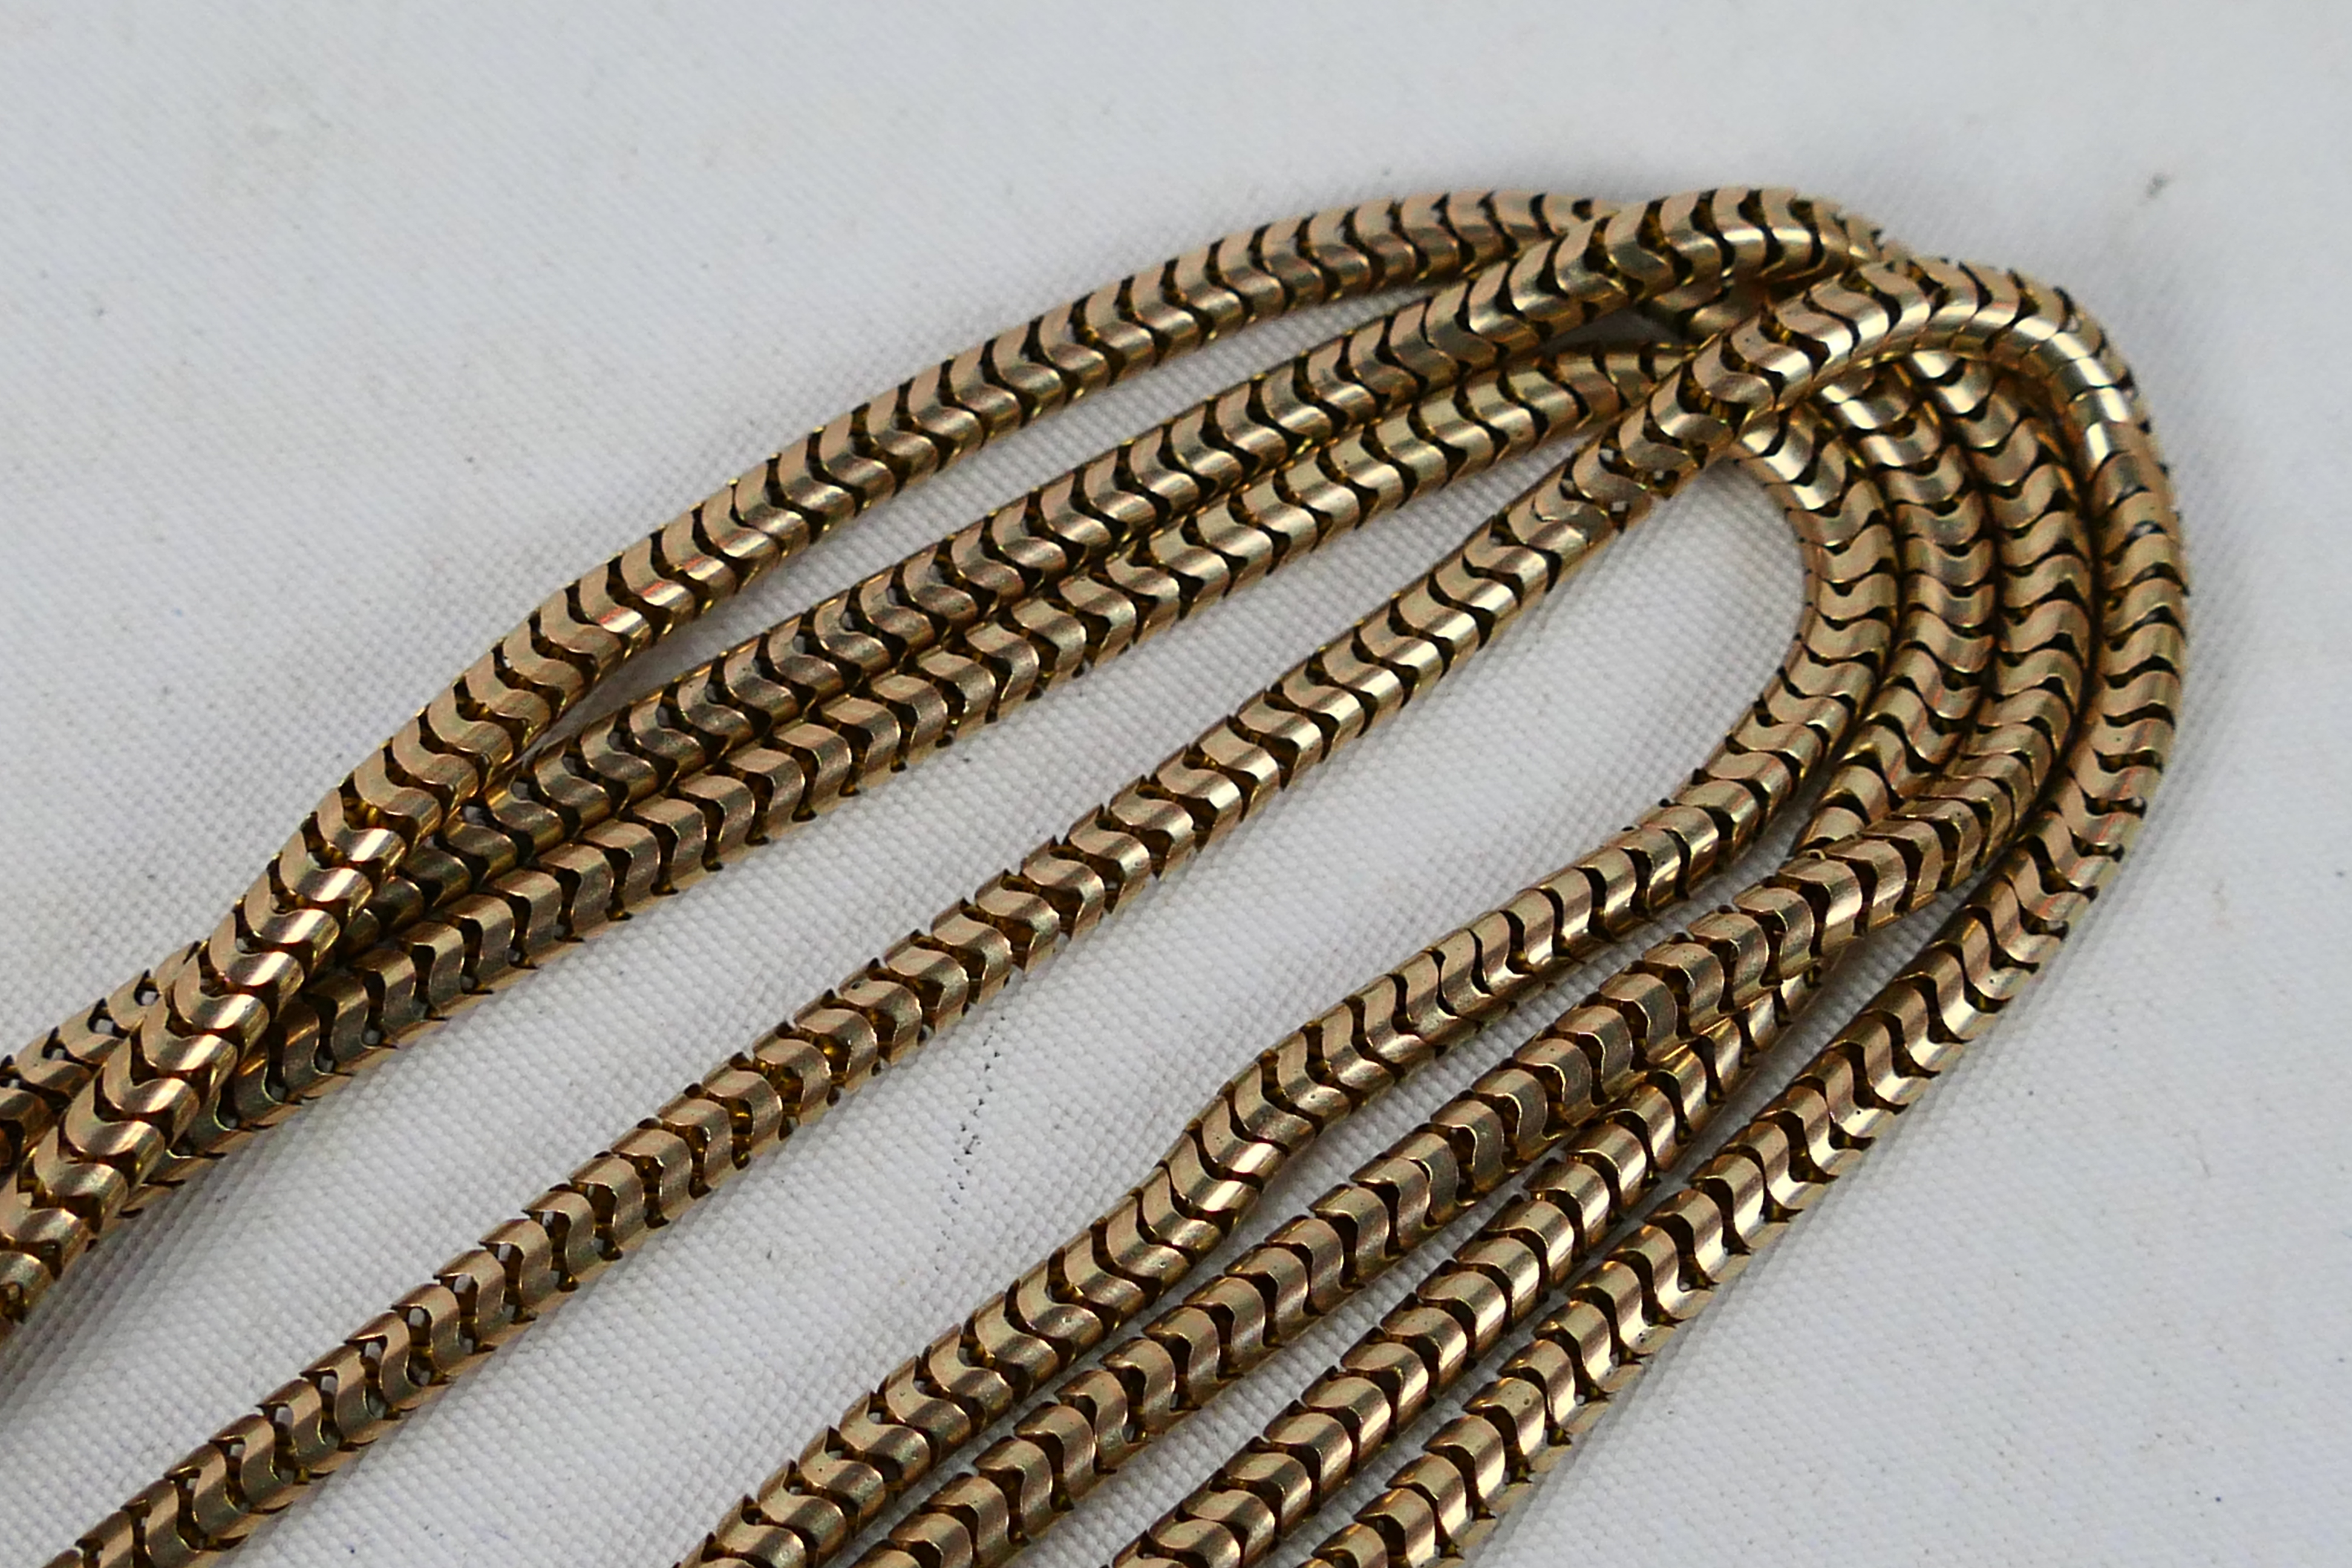 A yellow metal, muff chain and clasp, stamped 9c, 156 cm (l), approximately 44 grams all in. - Image 2 of 4